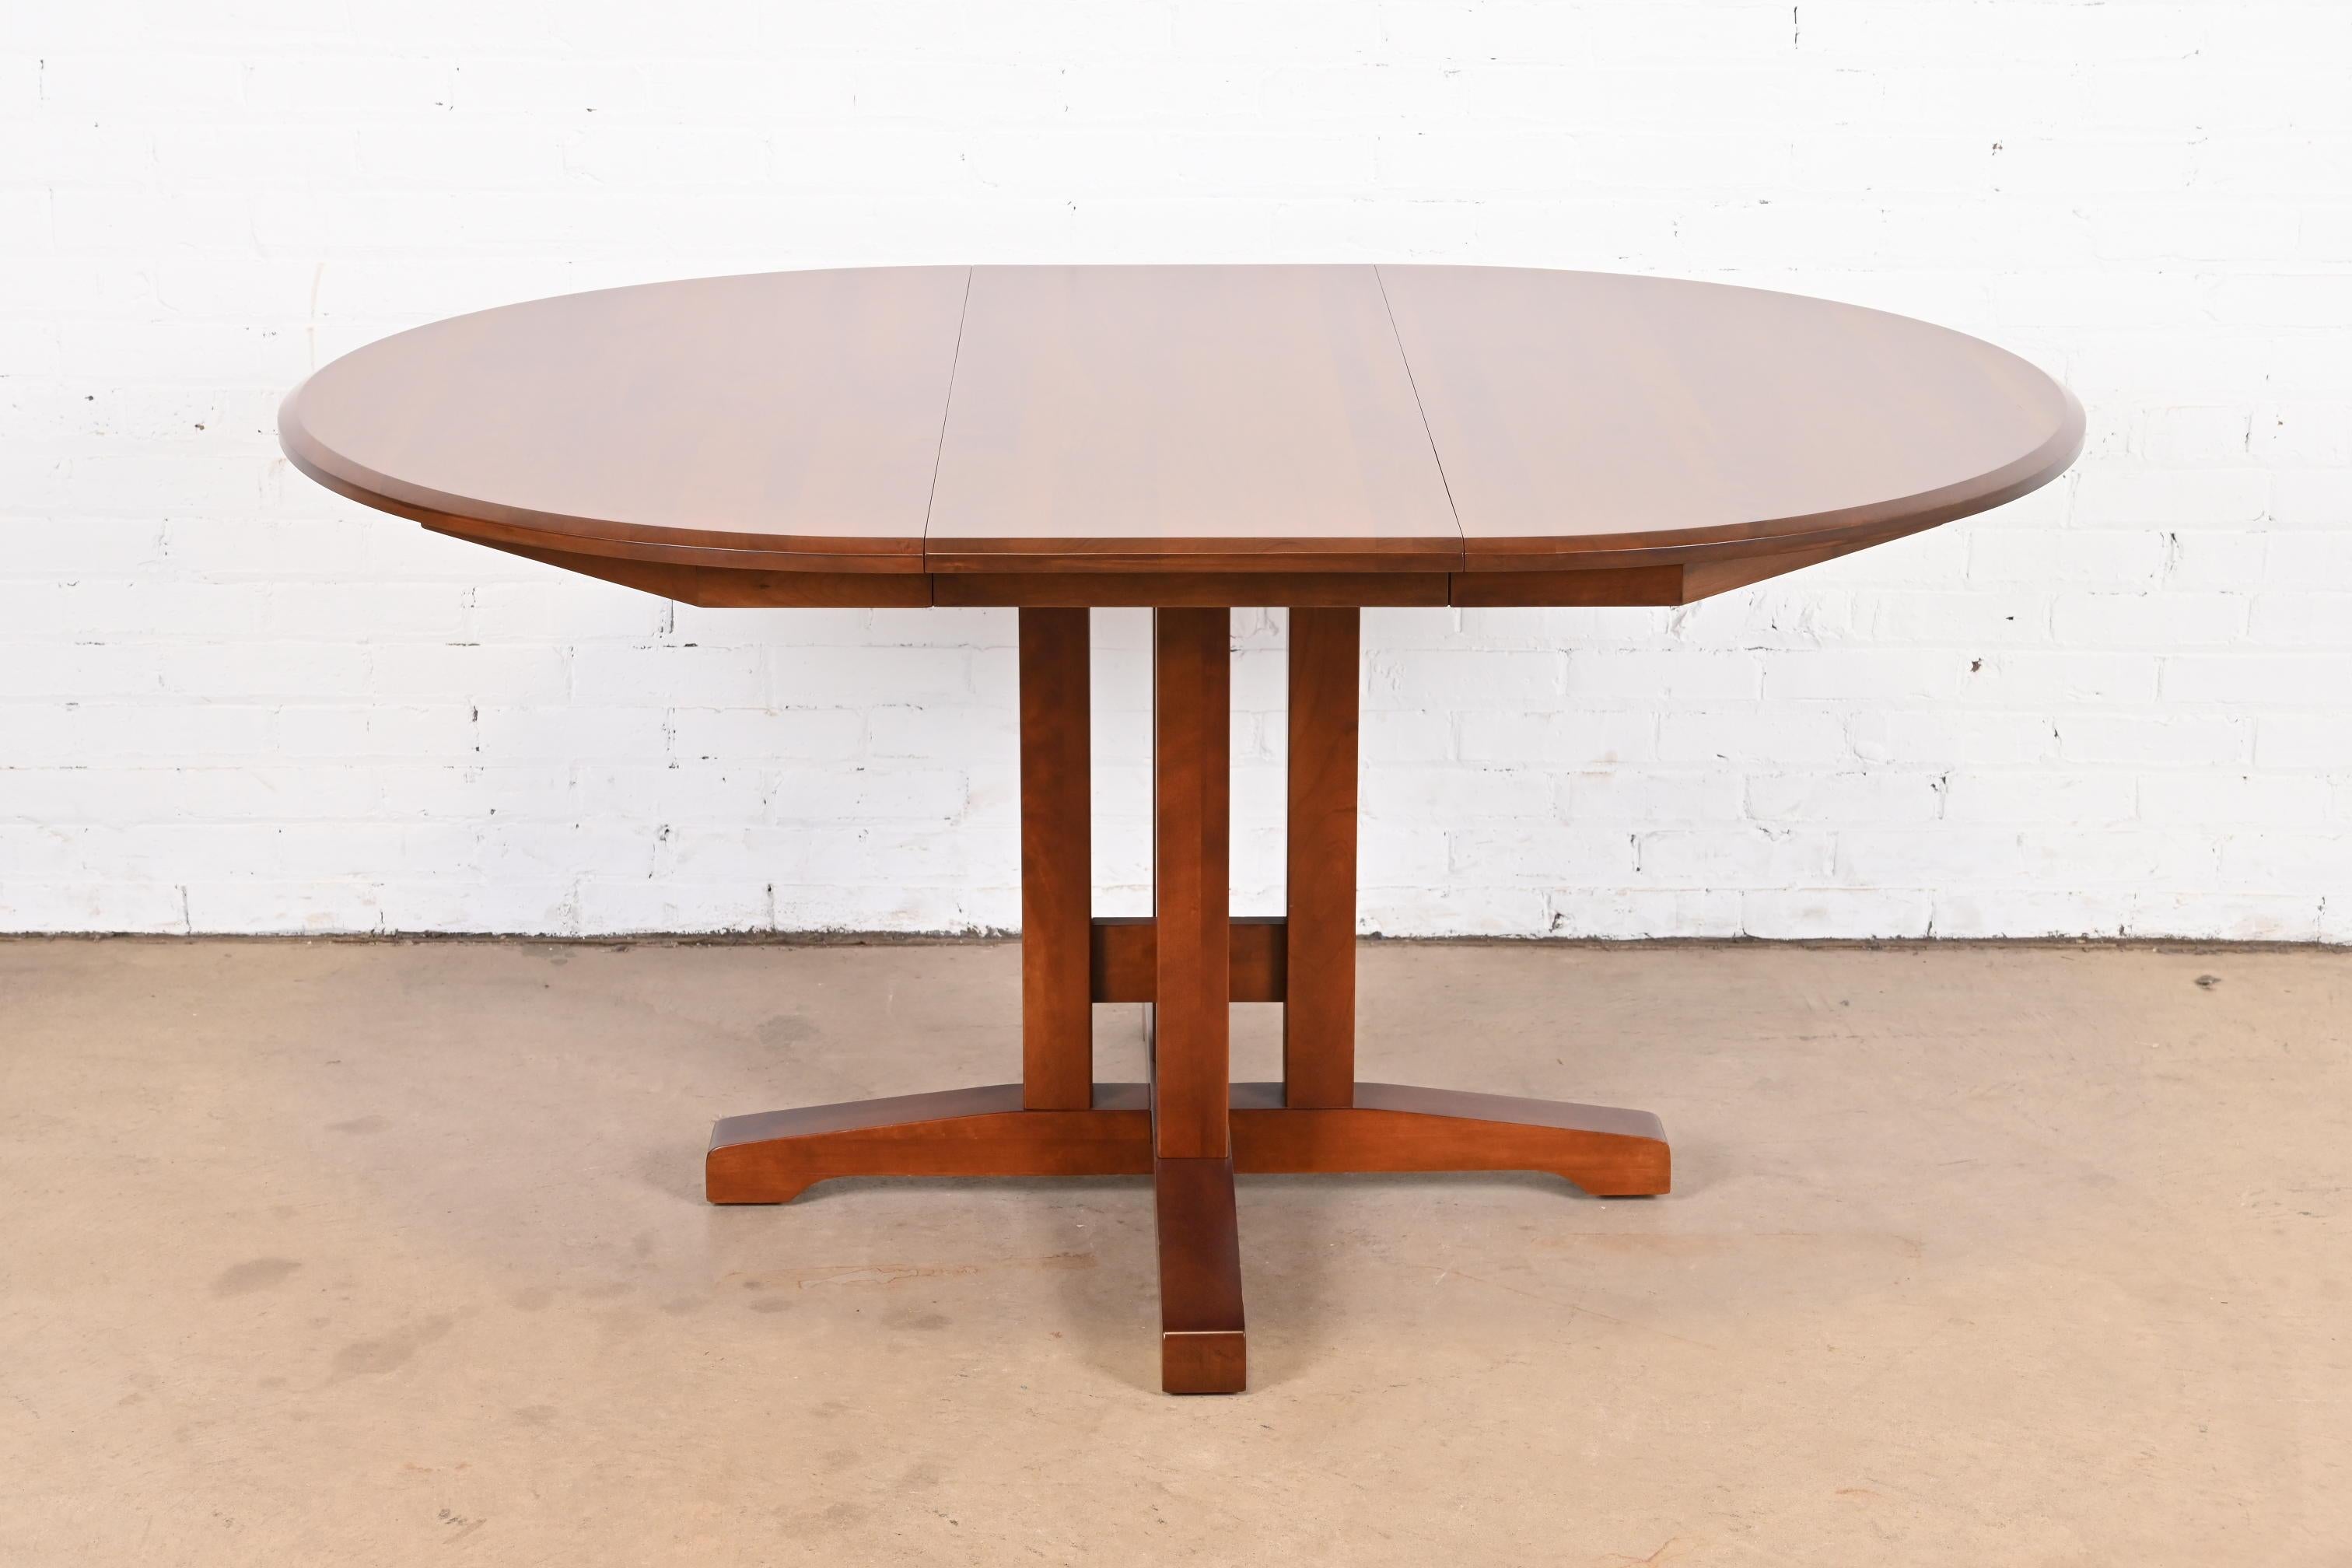 A gorgeous Mission, Arts & Crafts, or Shaker style solid cherry wood pedestal extension dining table

In the manner of Thomas Moser

USA, Circa 1990s

Measures: 46